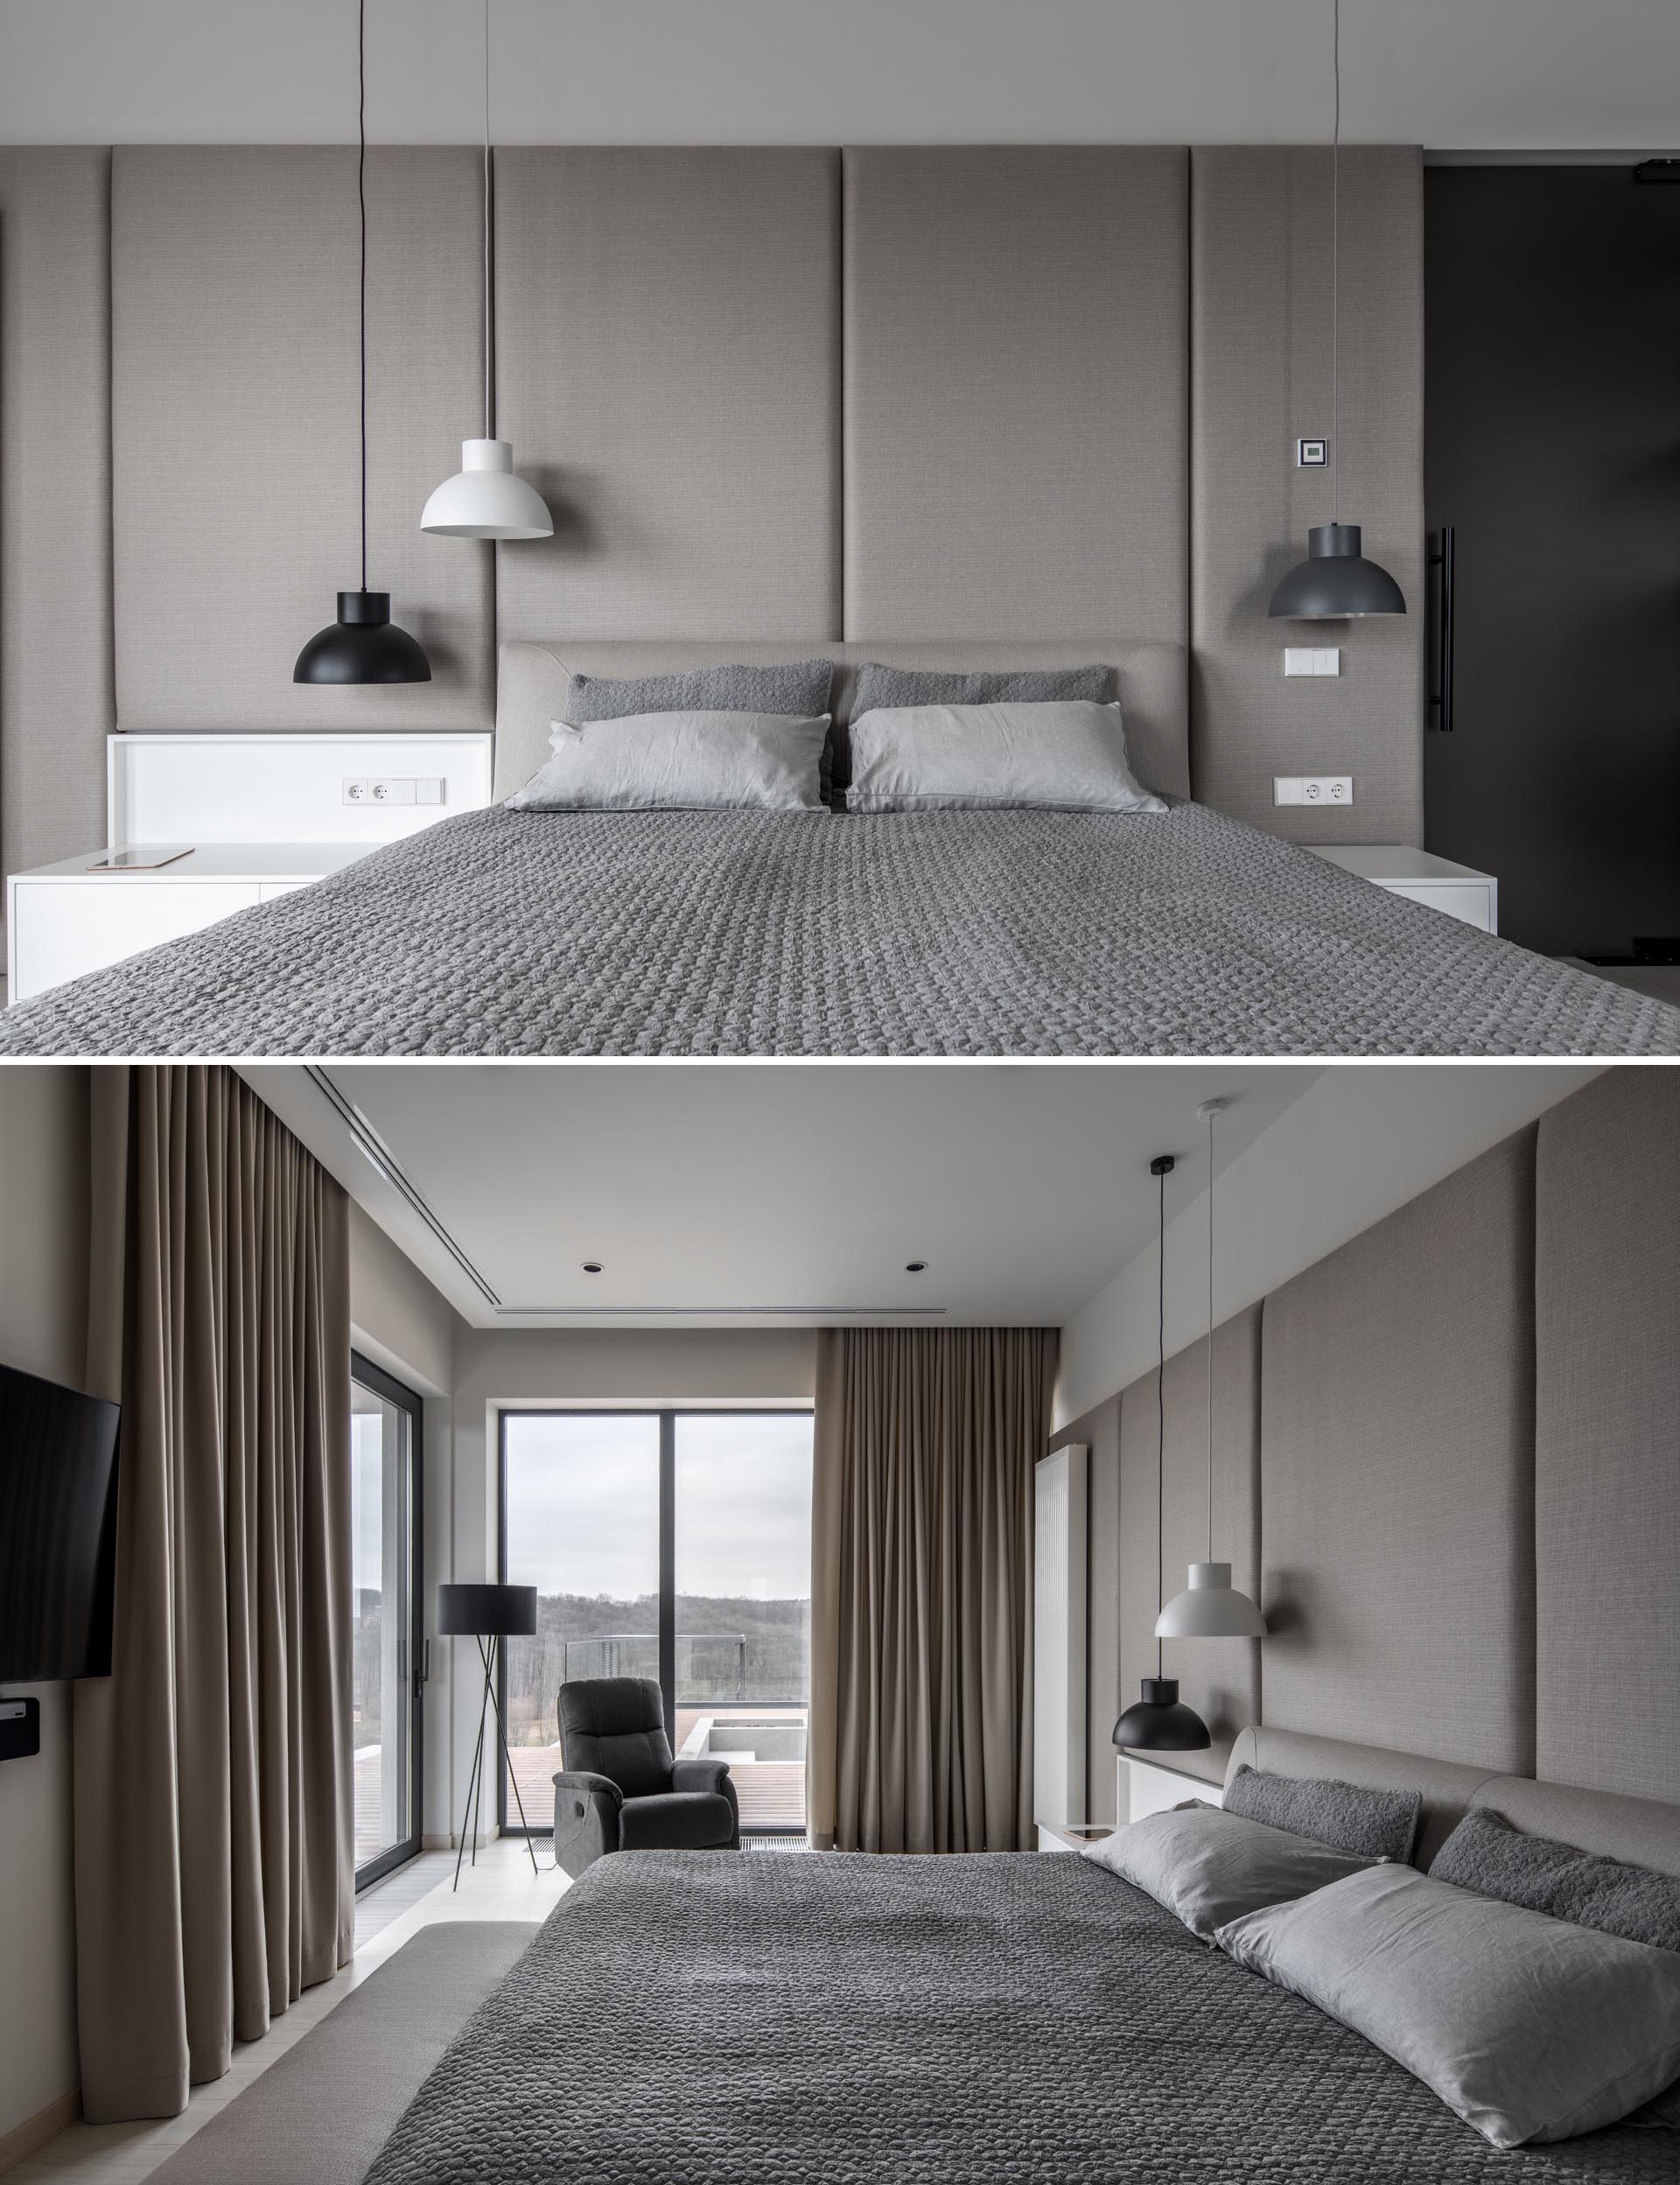 A modern hotel-like bedroom with a gray and beige color palette, and white and black accents.